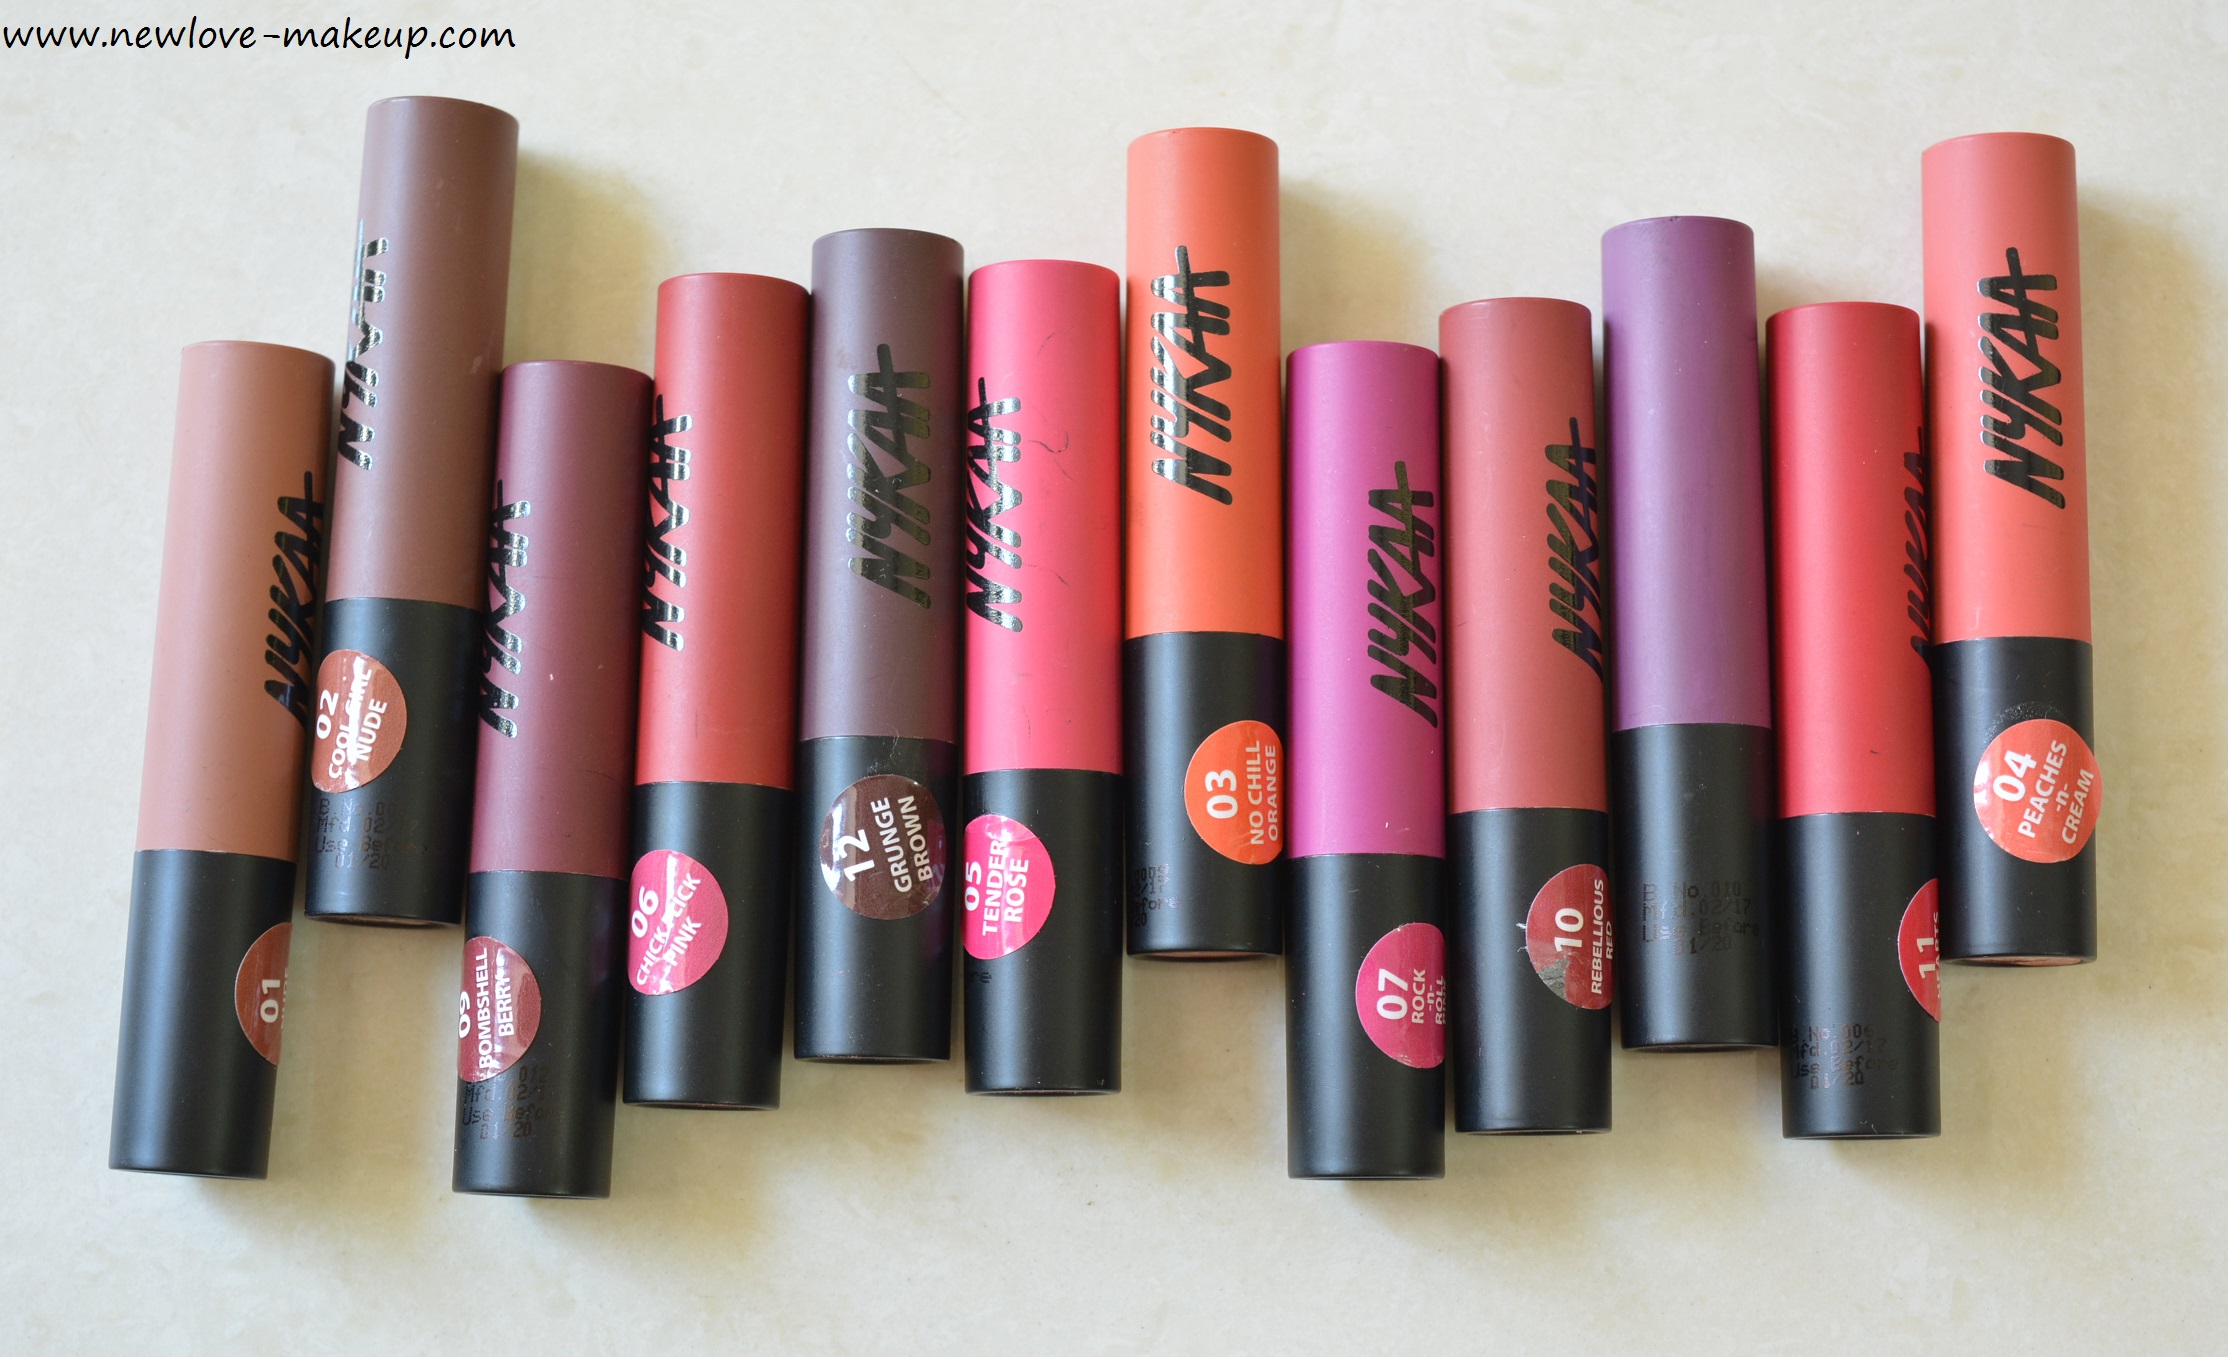 All Nykaa PaintStix Review, Swatches